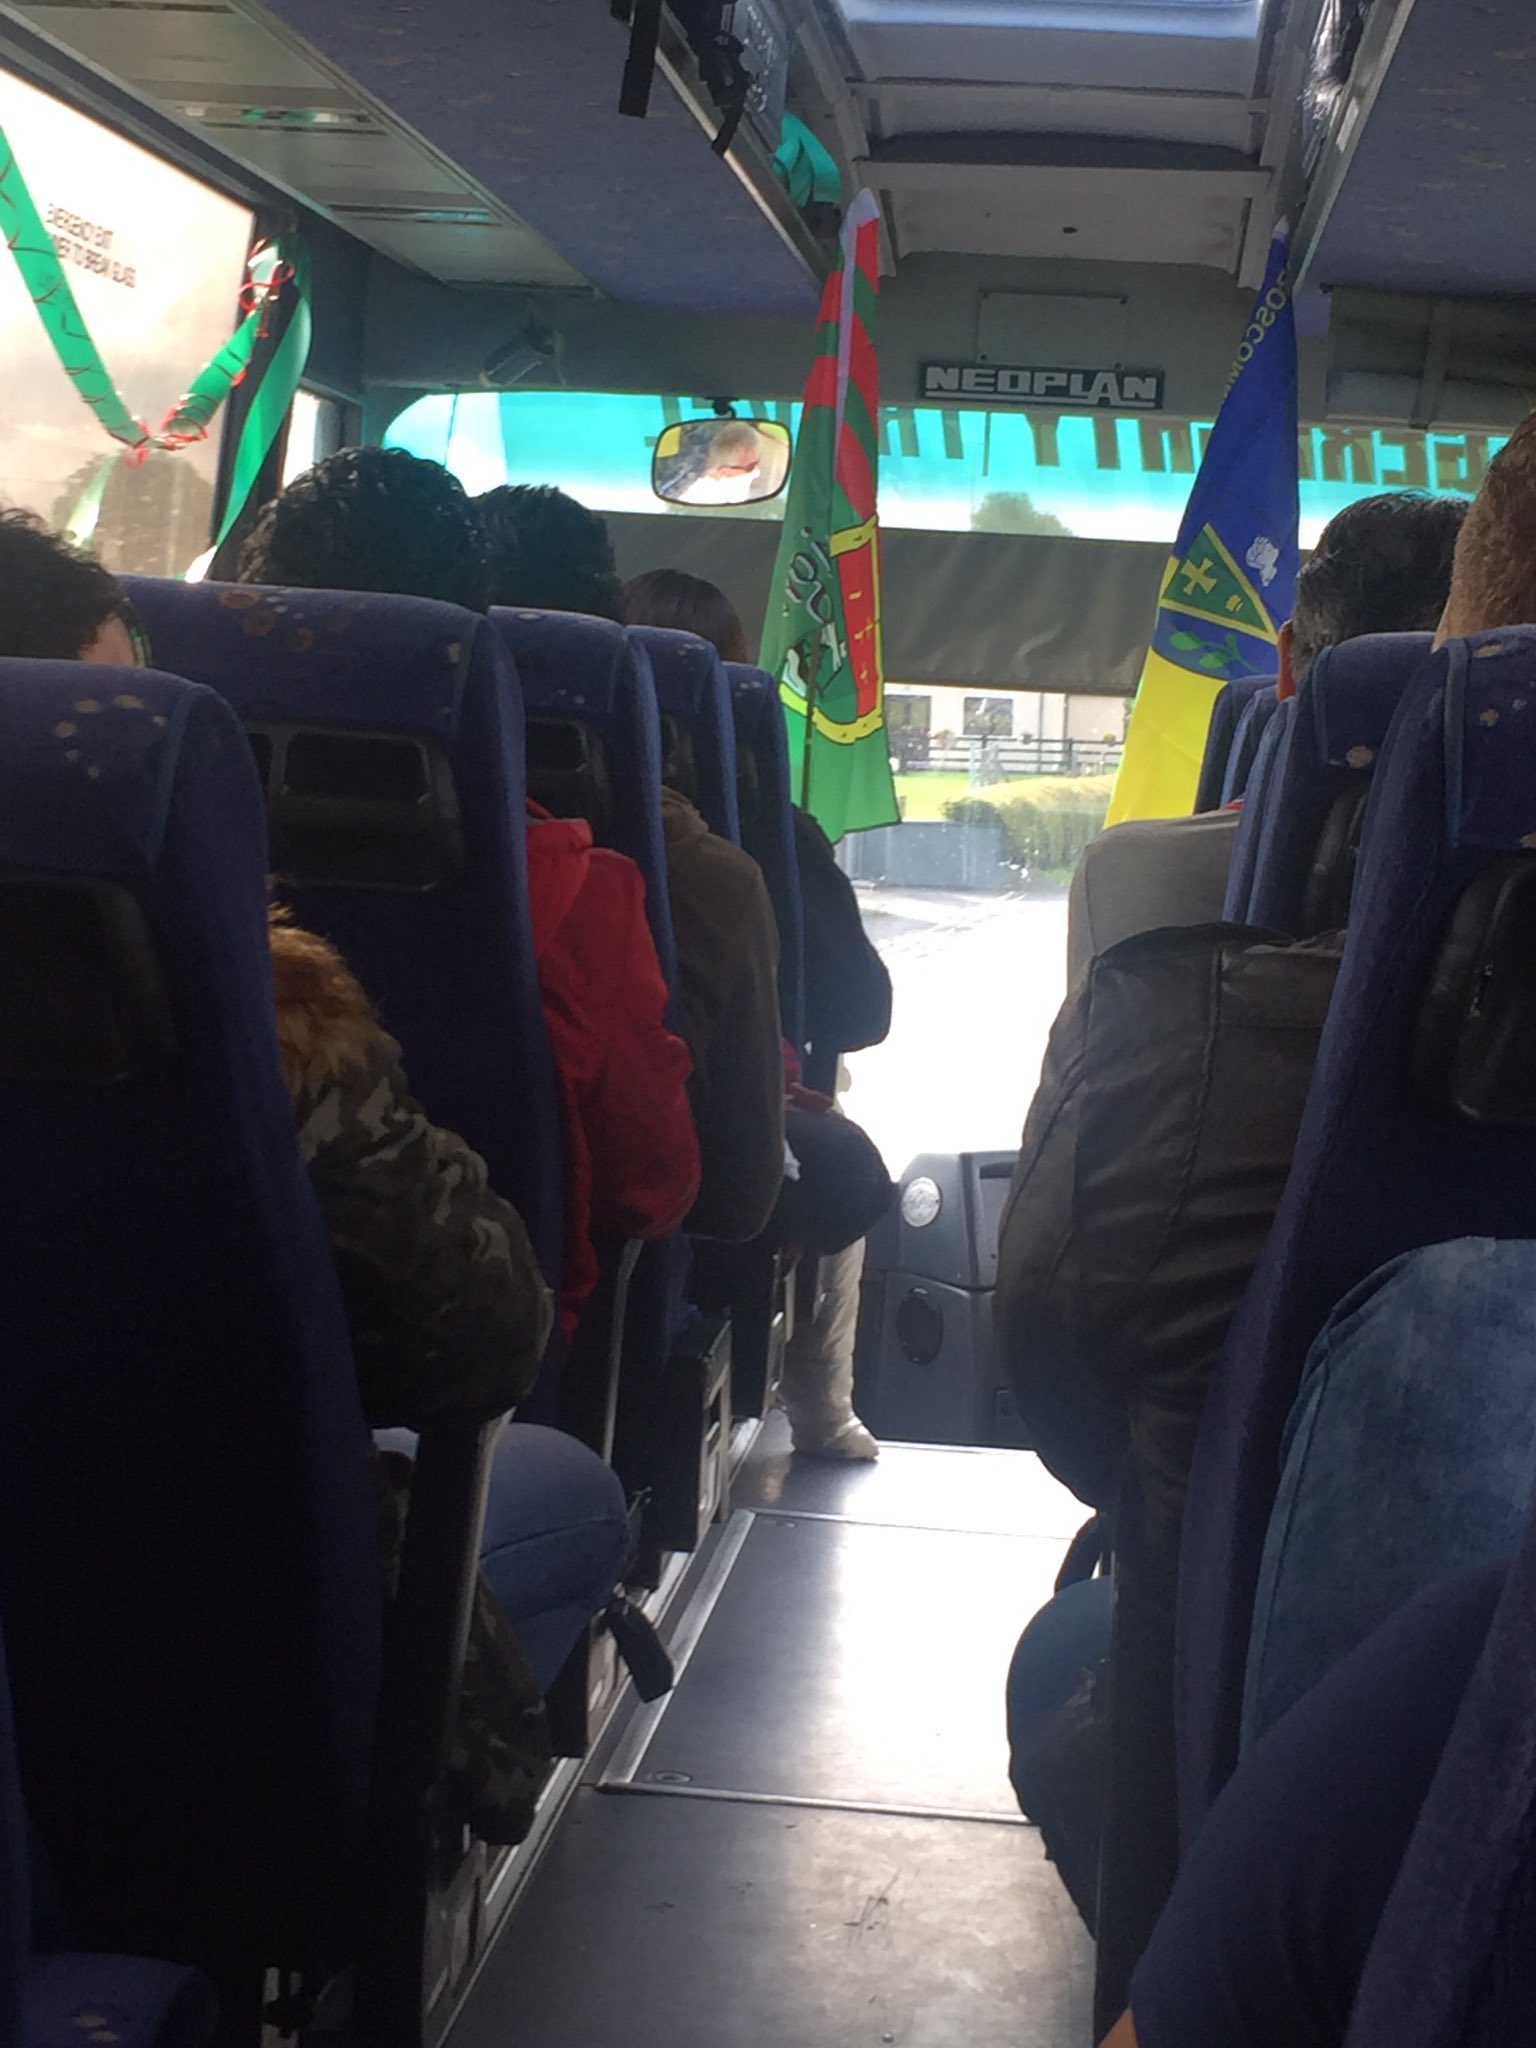 Flavor Calculation Executable Niall McGarry on Twitter: "They hasn't factored in a replay, so happy to  say that @JOEdotie has laid on a bus to bring back the Ballaghadereen  Syrians to Croker! https://t.co/zPUSwMvGSK" / Twitter